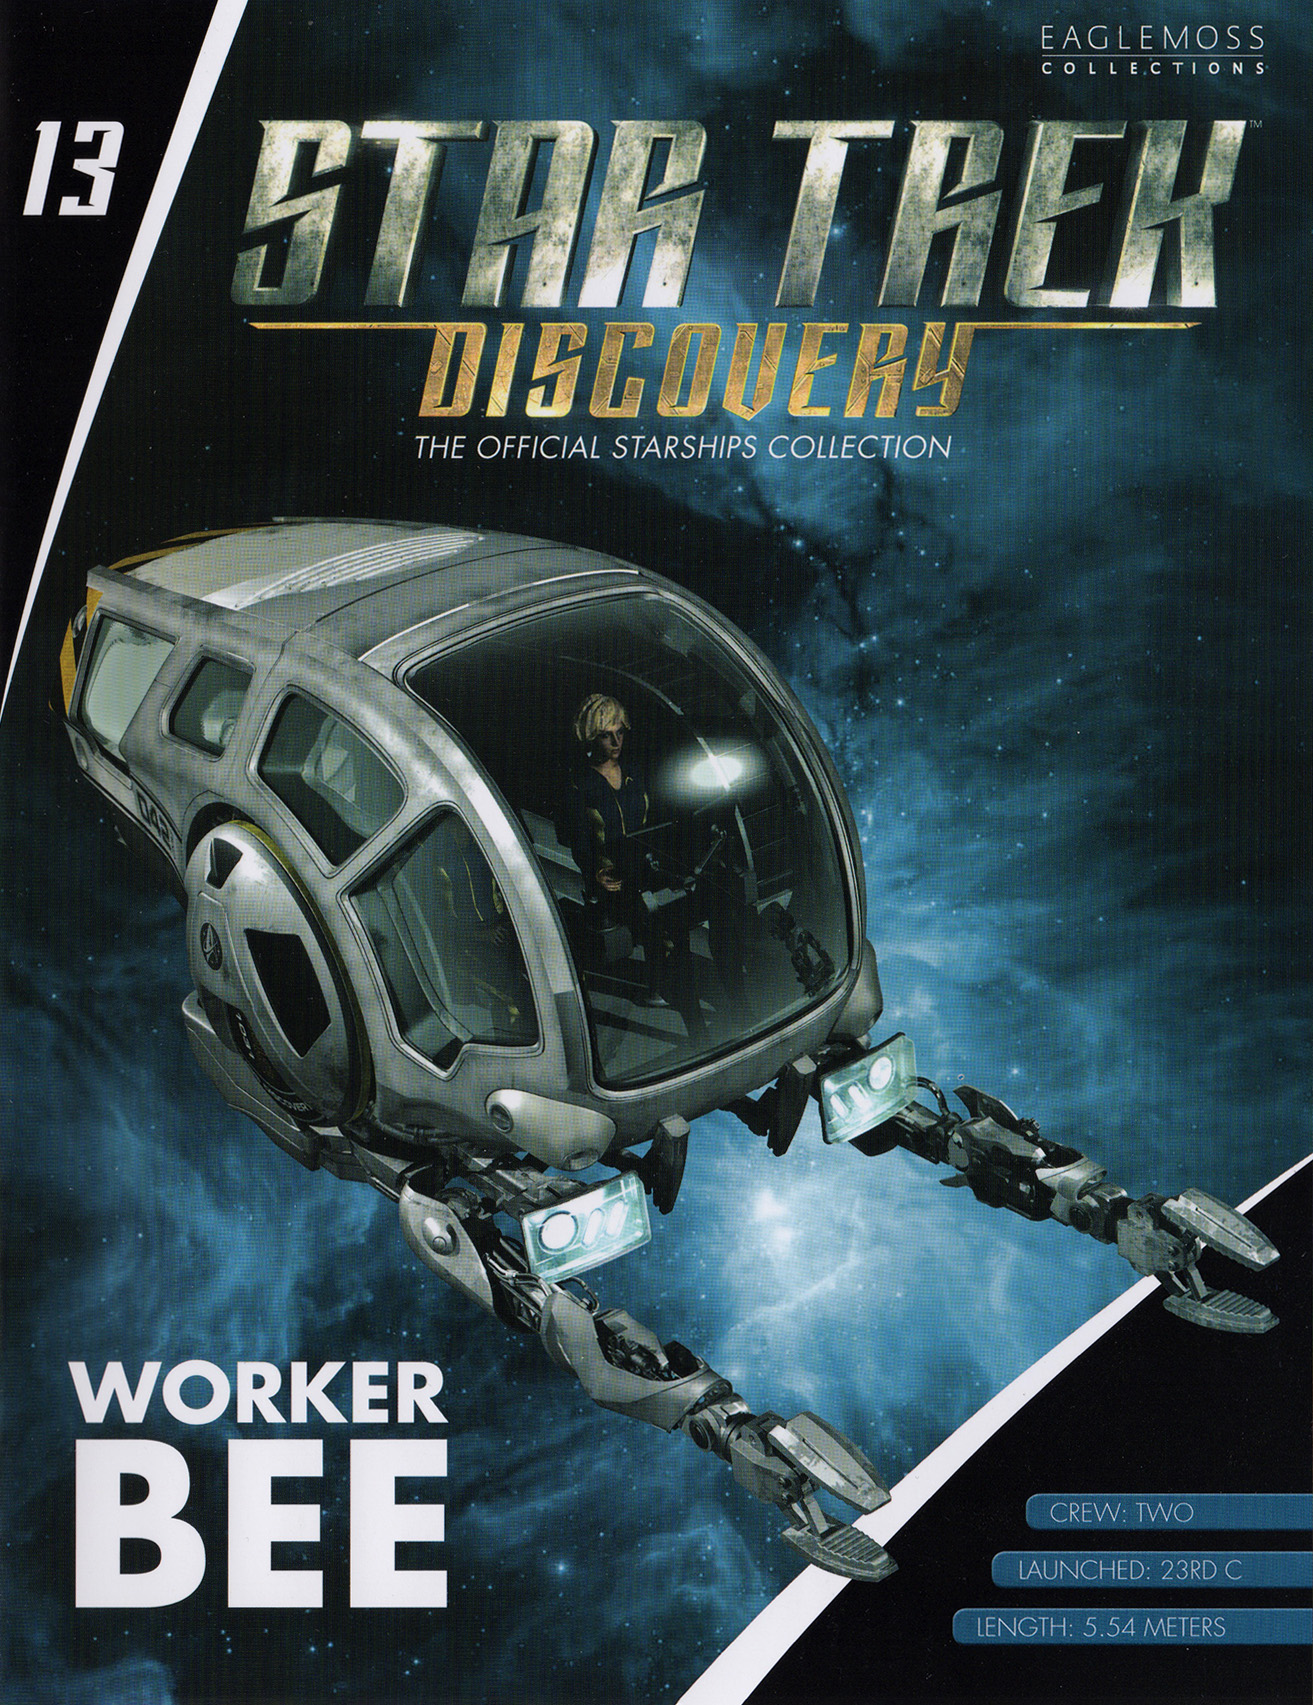 Star Trek: Discovery- The Official Starships Collection #13.jpg